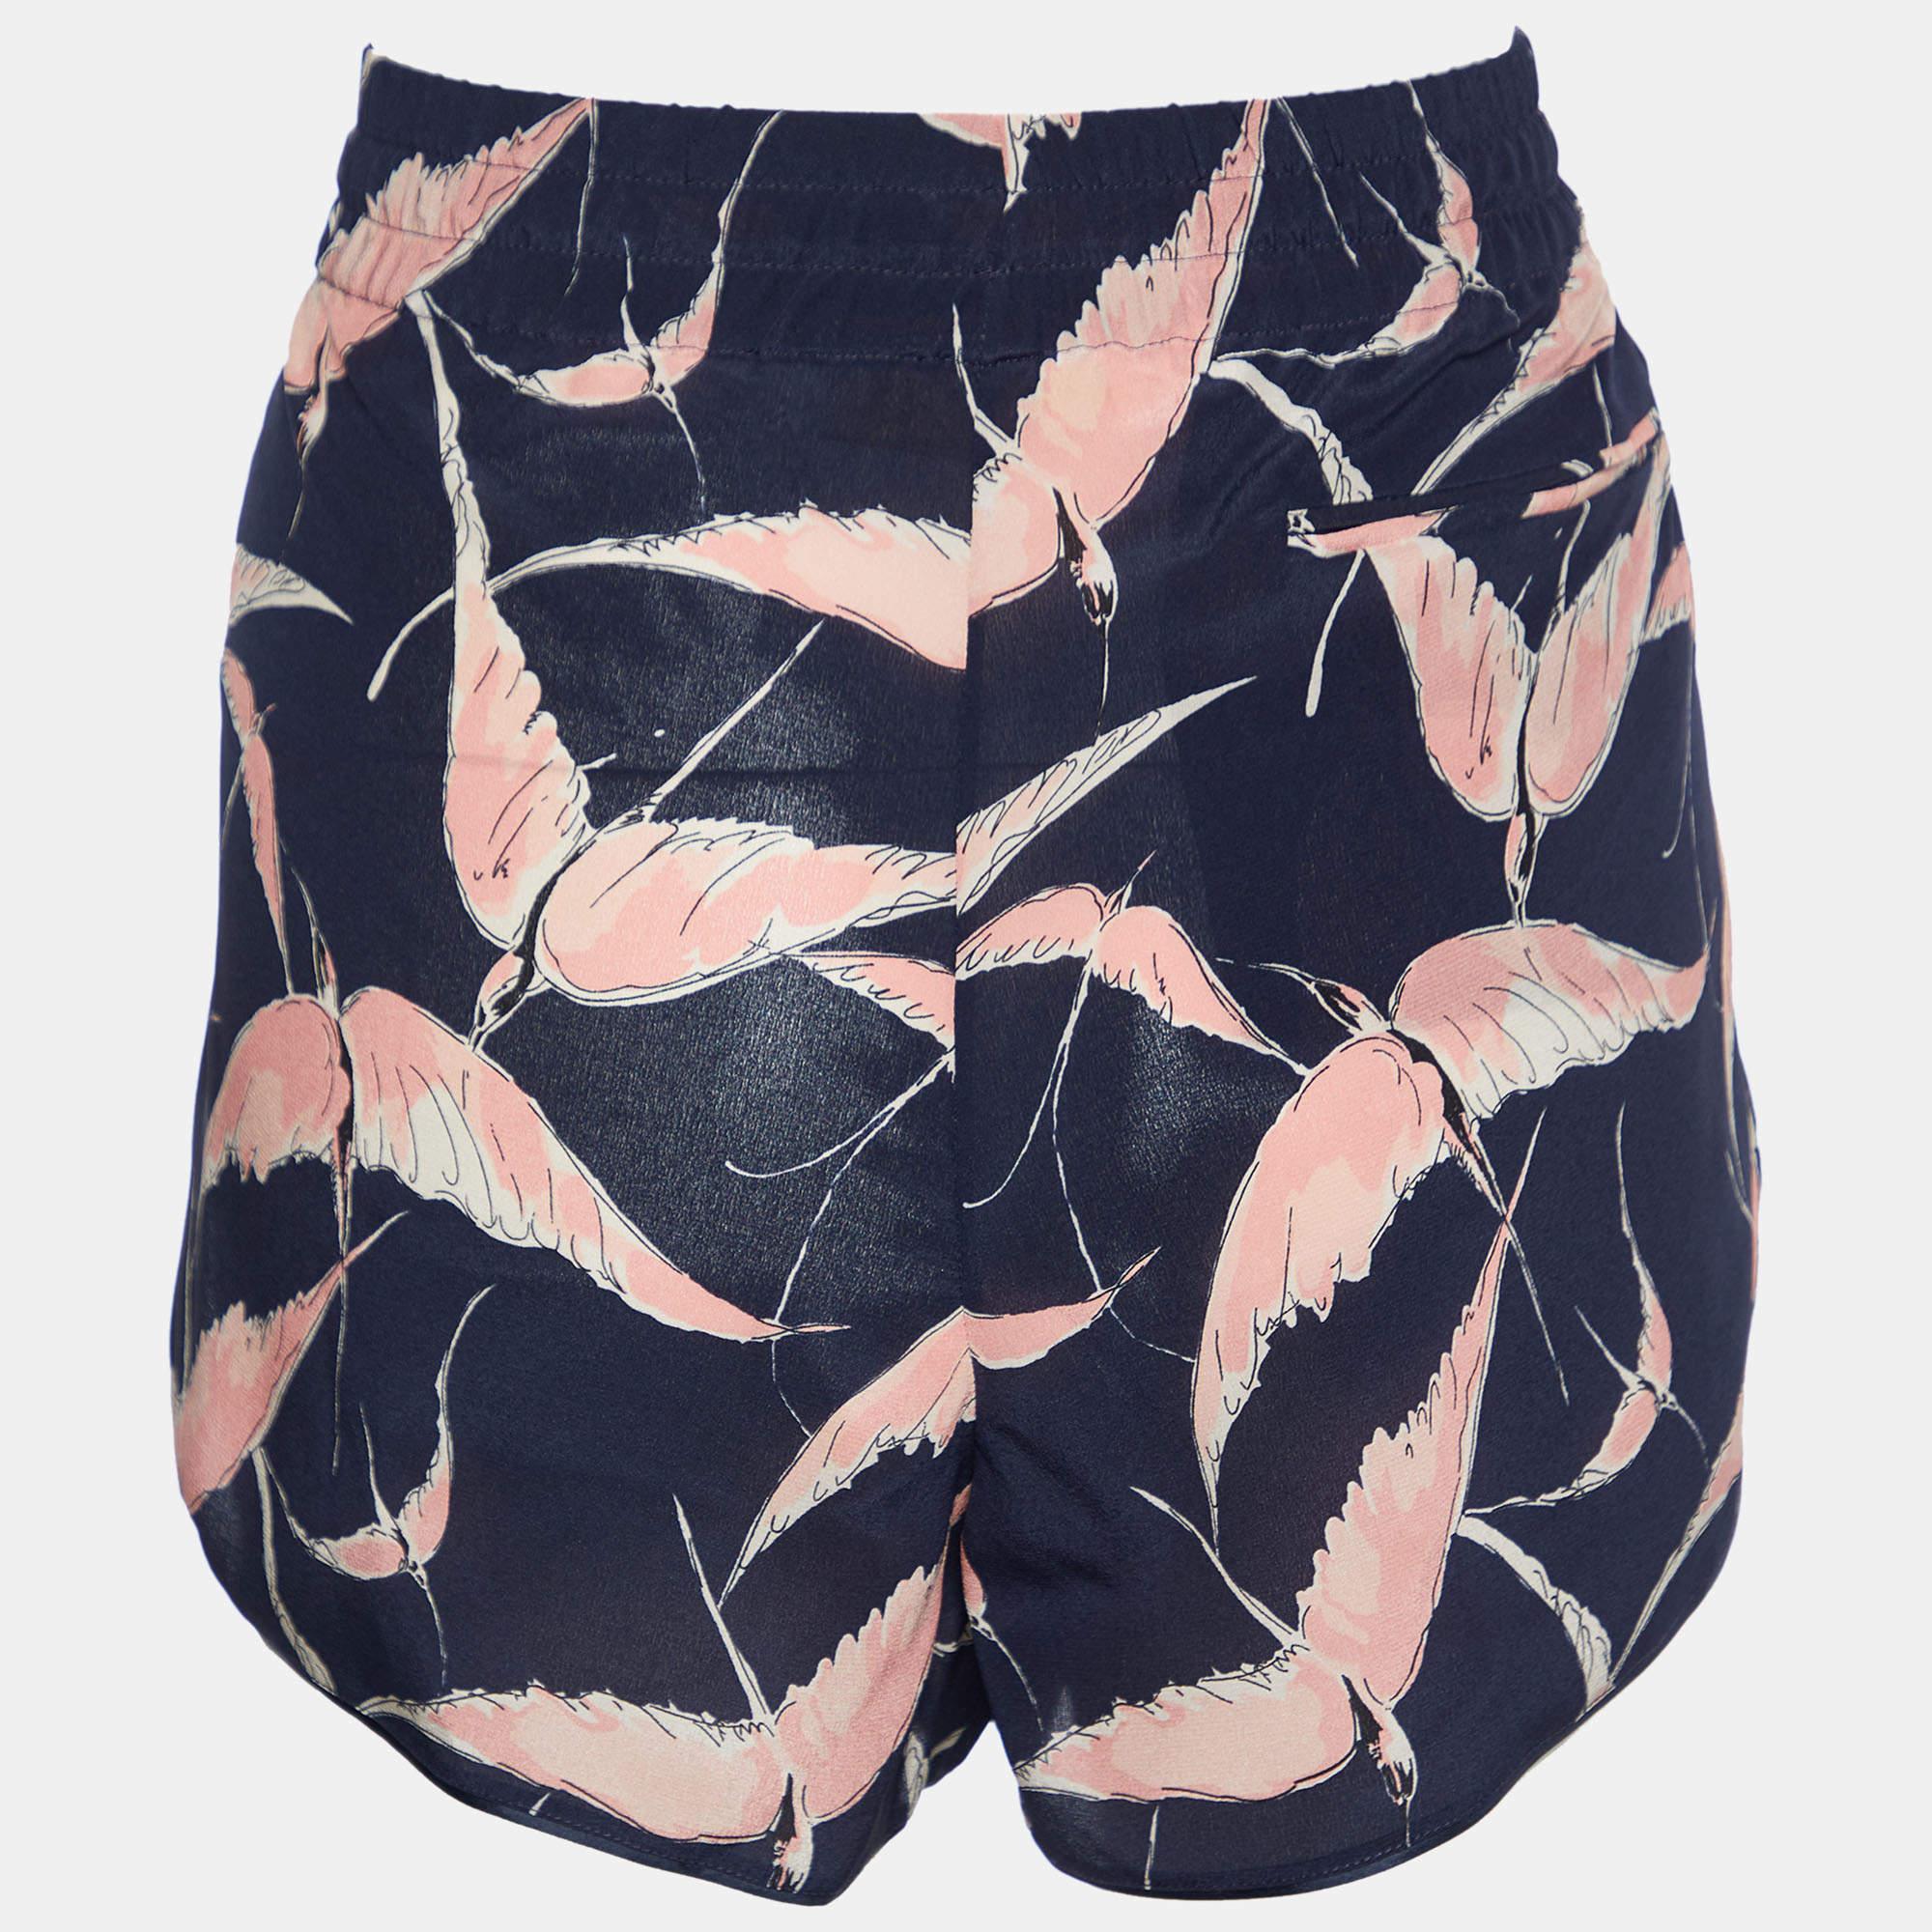 Beachy vacations call for a stylish pair of shorts like this. Stitched using high-quality fabric, this pair of shorts is styled with classic details and has a superb length. Wear it with T-shirts.

Includes: Brand Tag